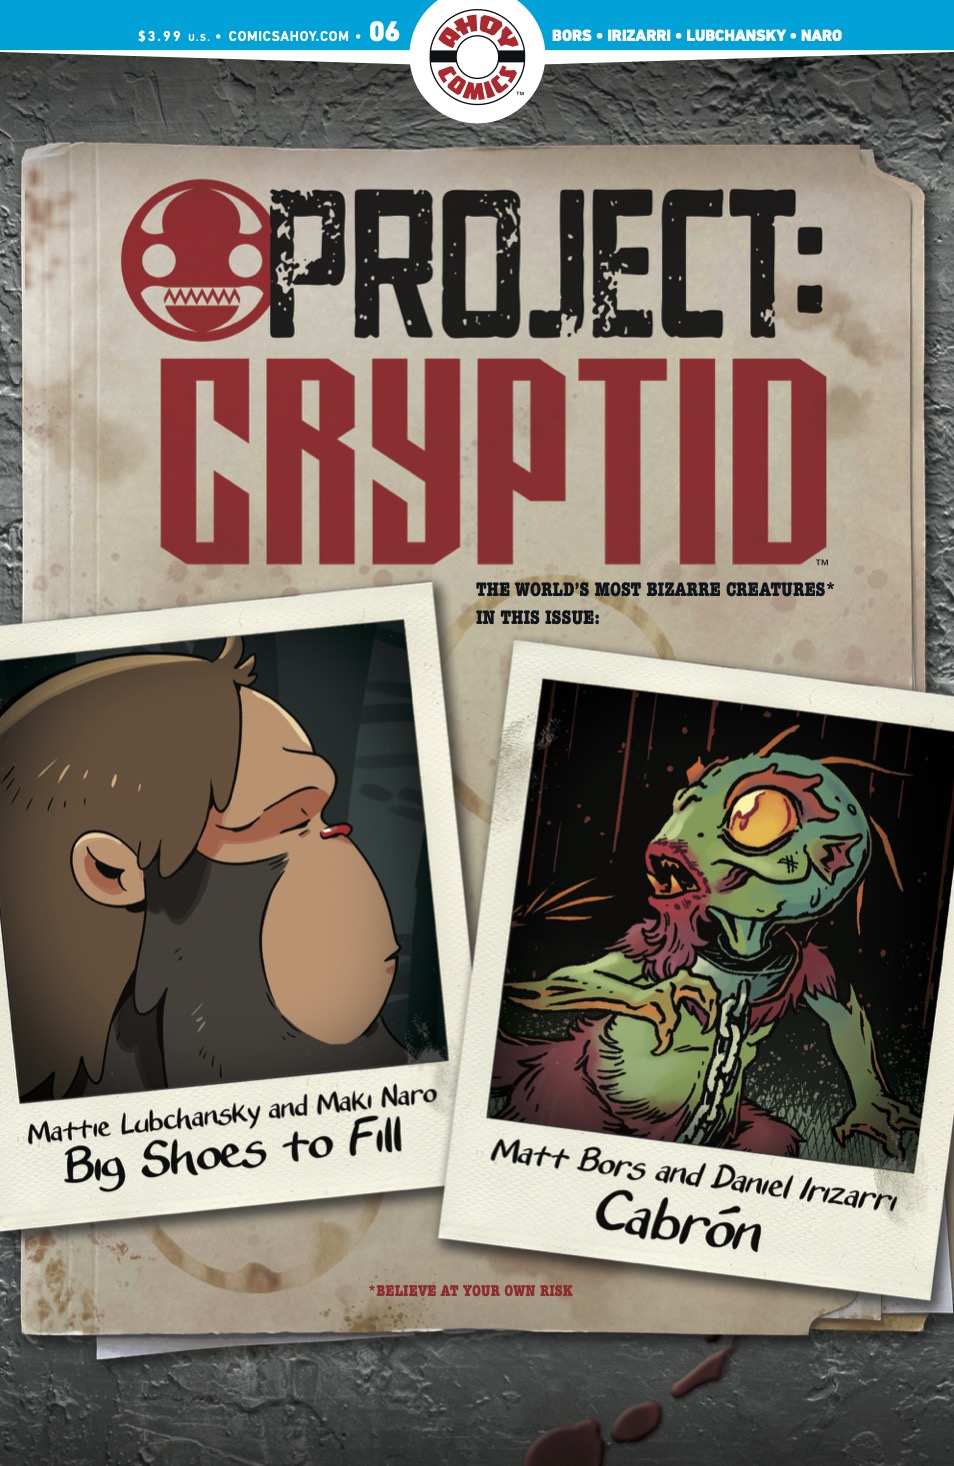 Project Cryptid #6 (Mature) (Of 6)